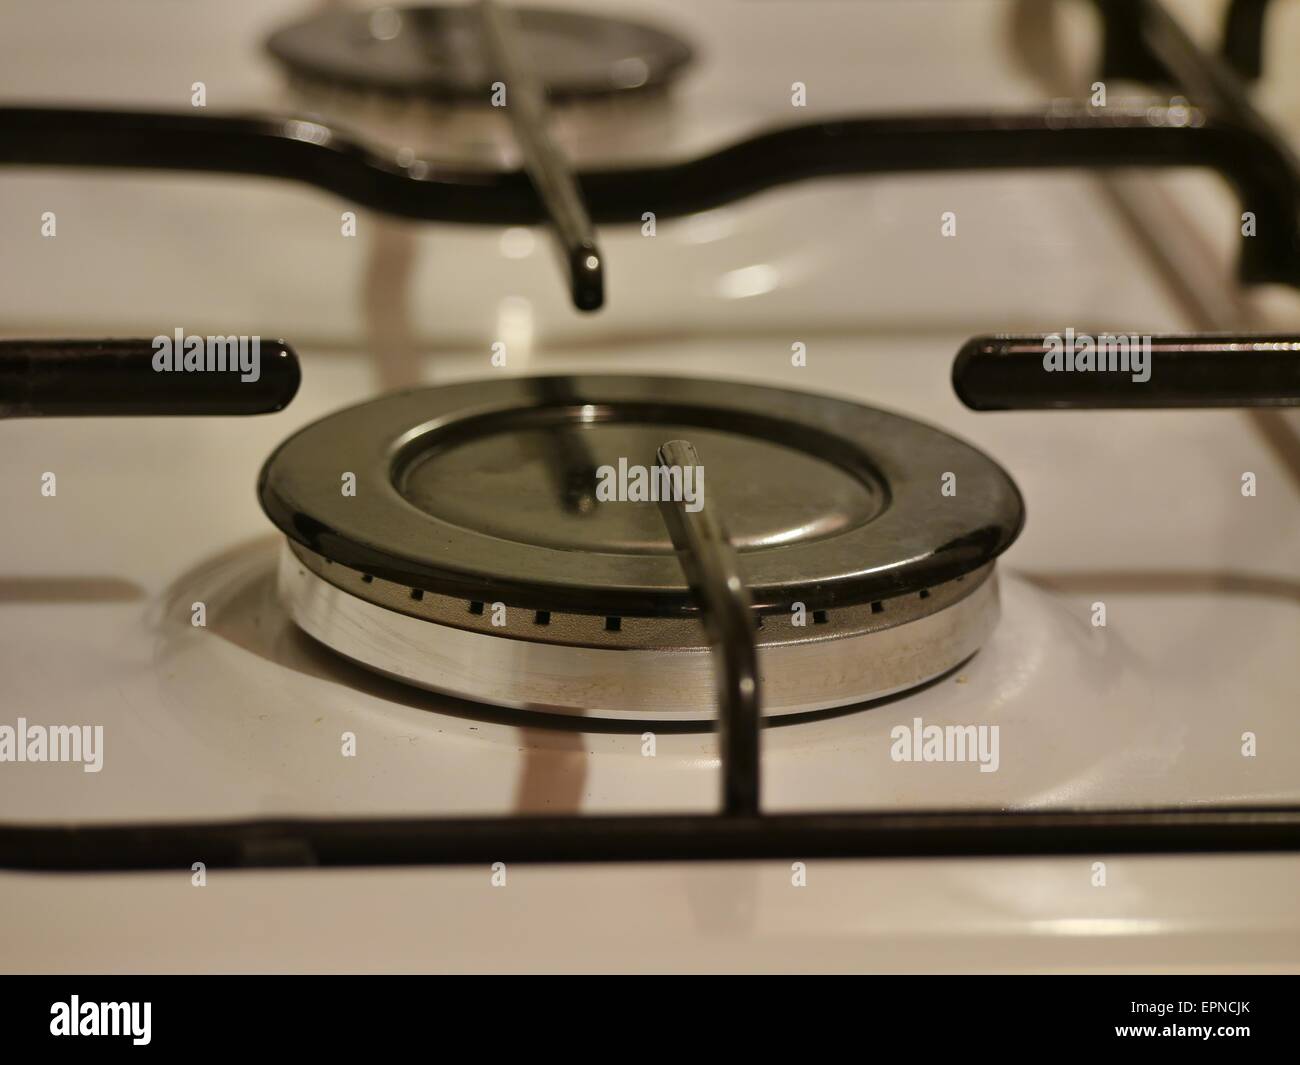 white and black gas cooker Stock Photo